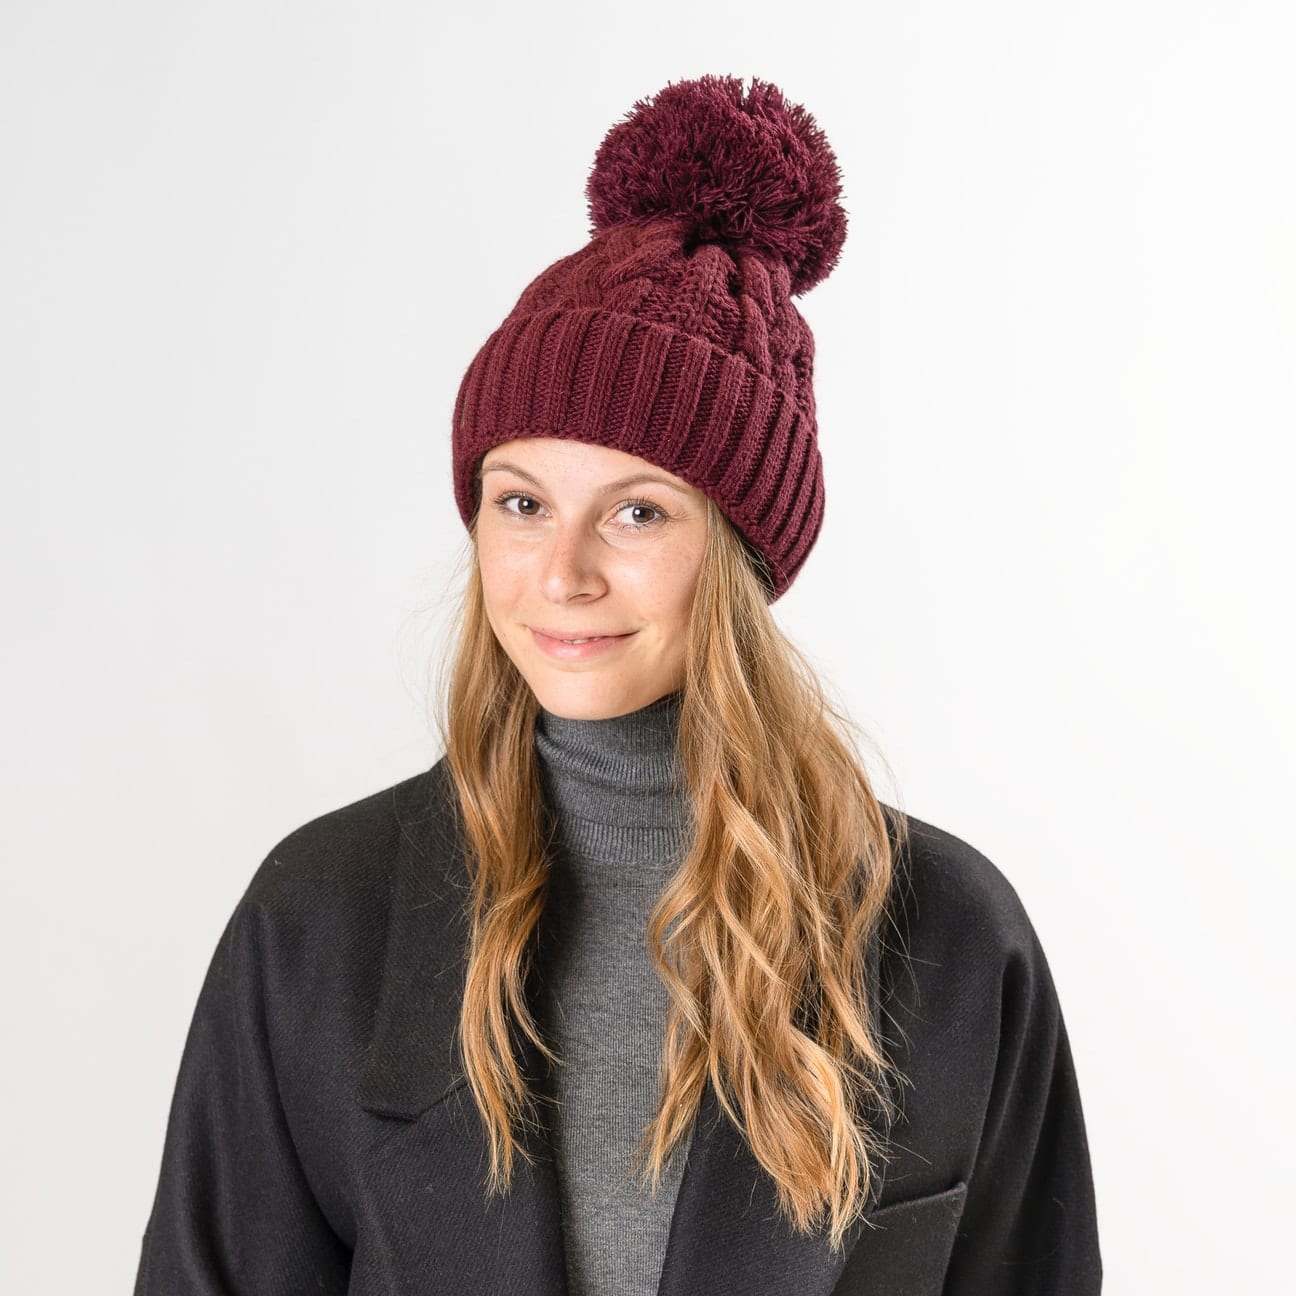 Giant Bobble Hat by McBURN - 49,95